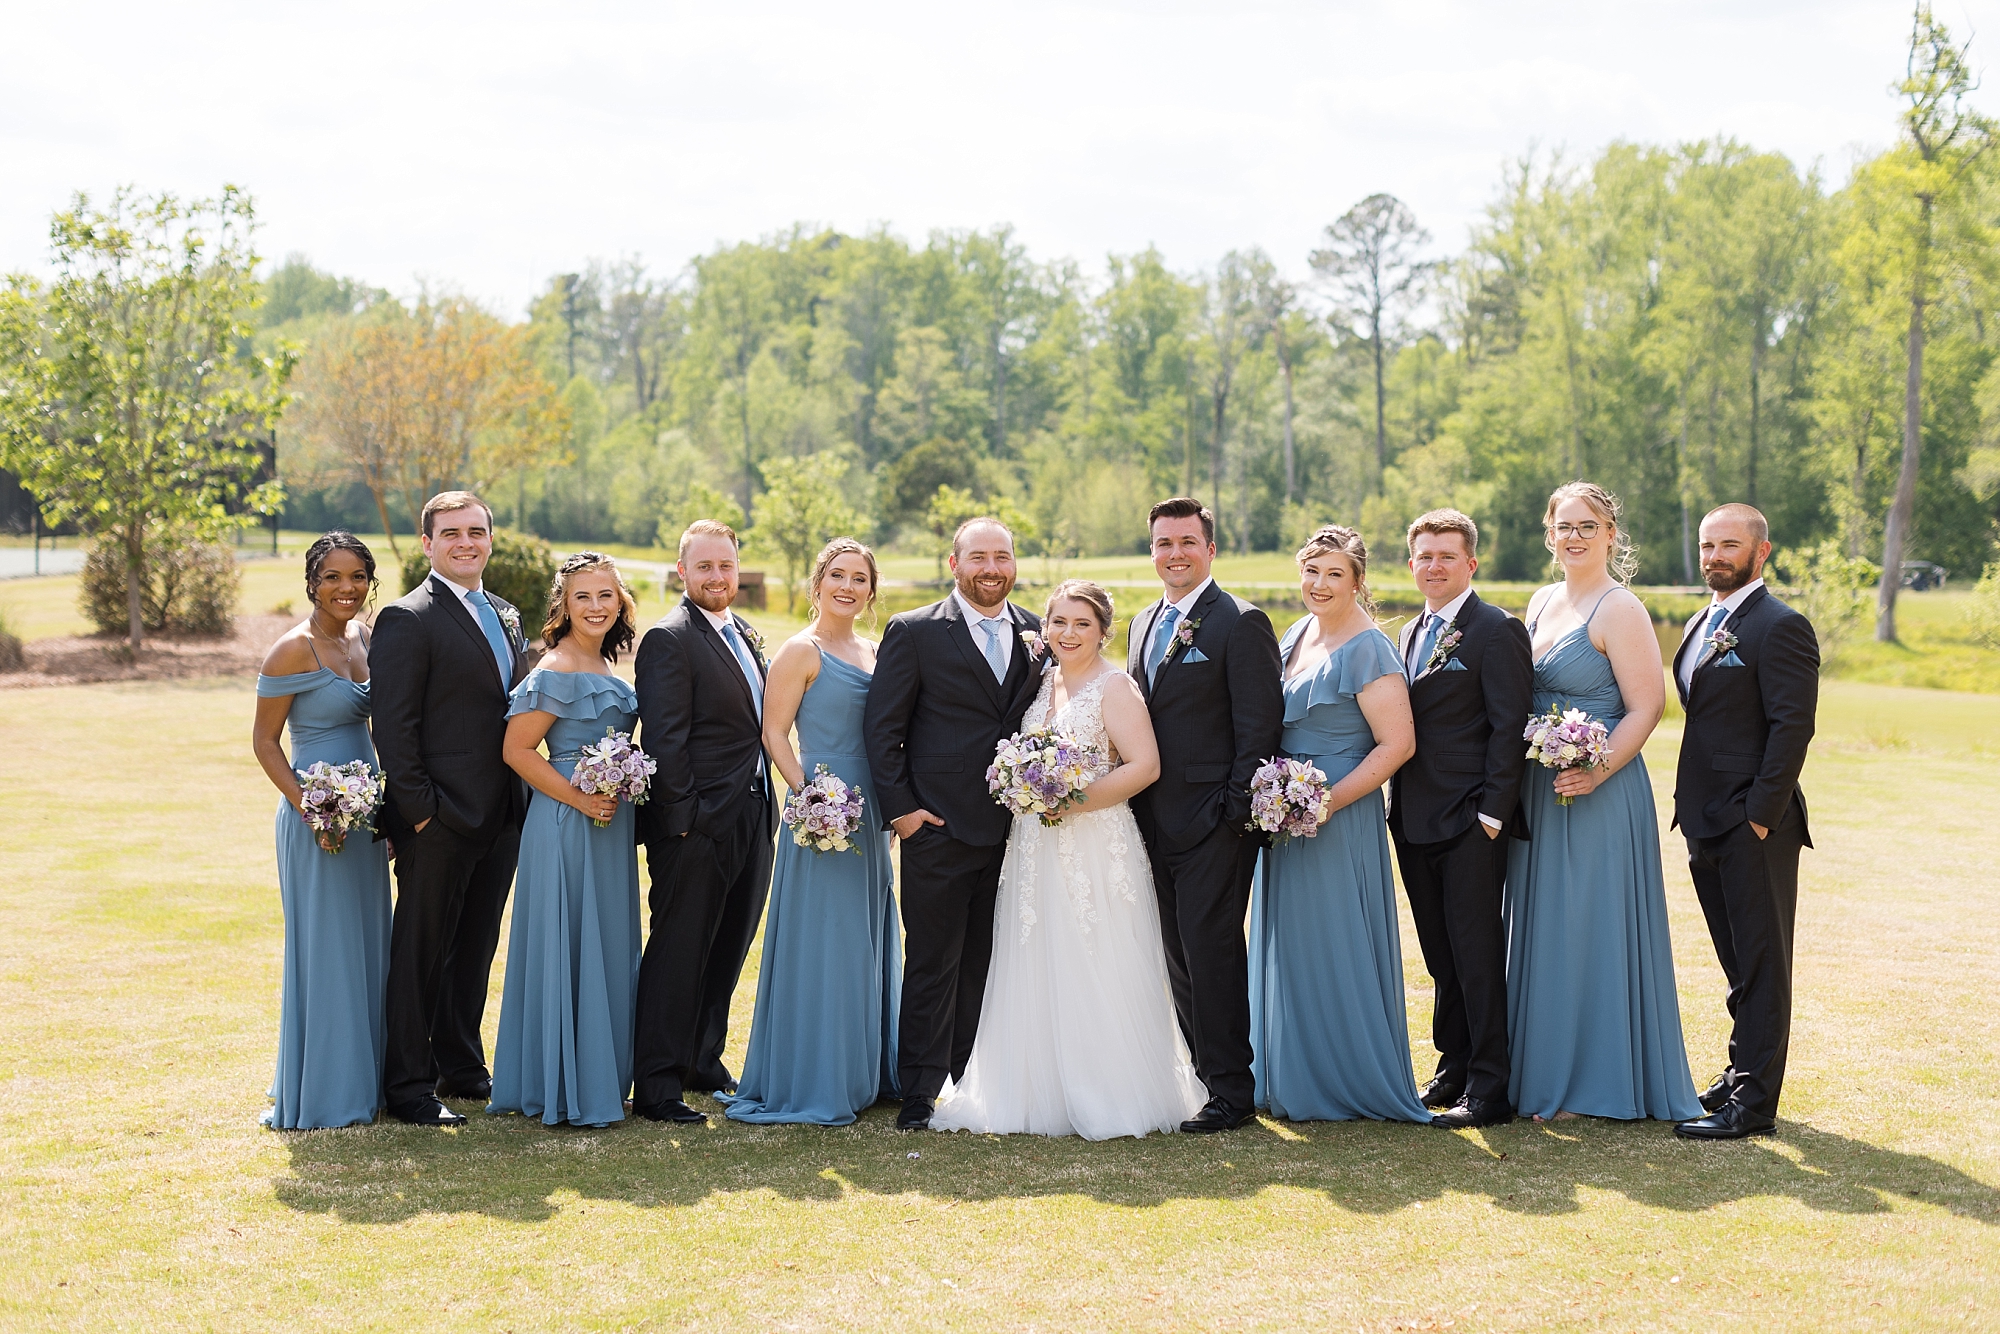 Wedding party with blue dresses and blue ties - Raleigh NC Wedding Photographer - Sarah Hinckley Photography